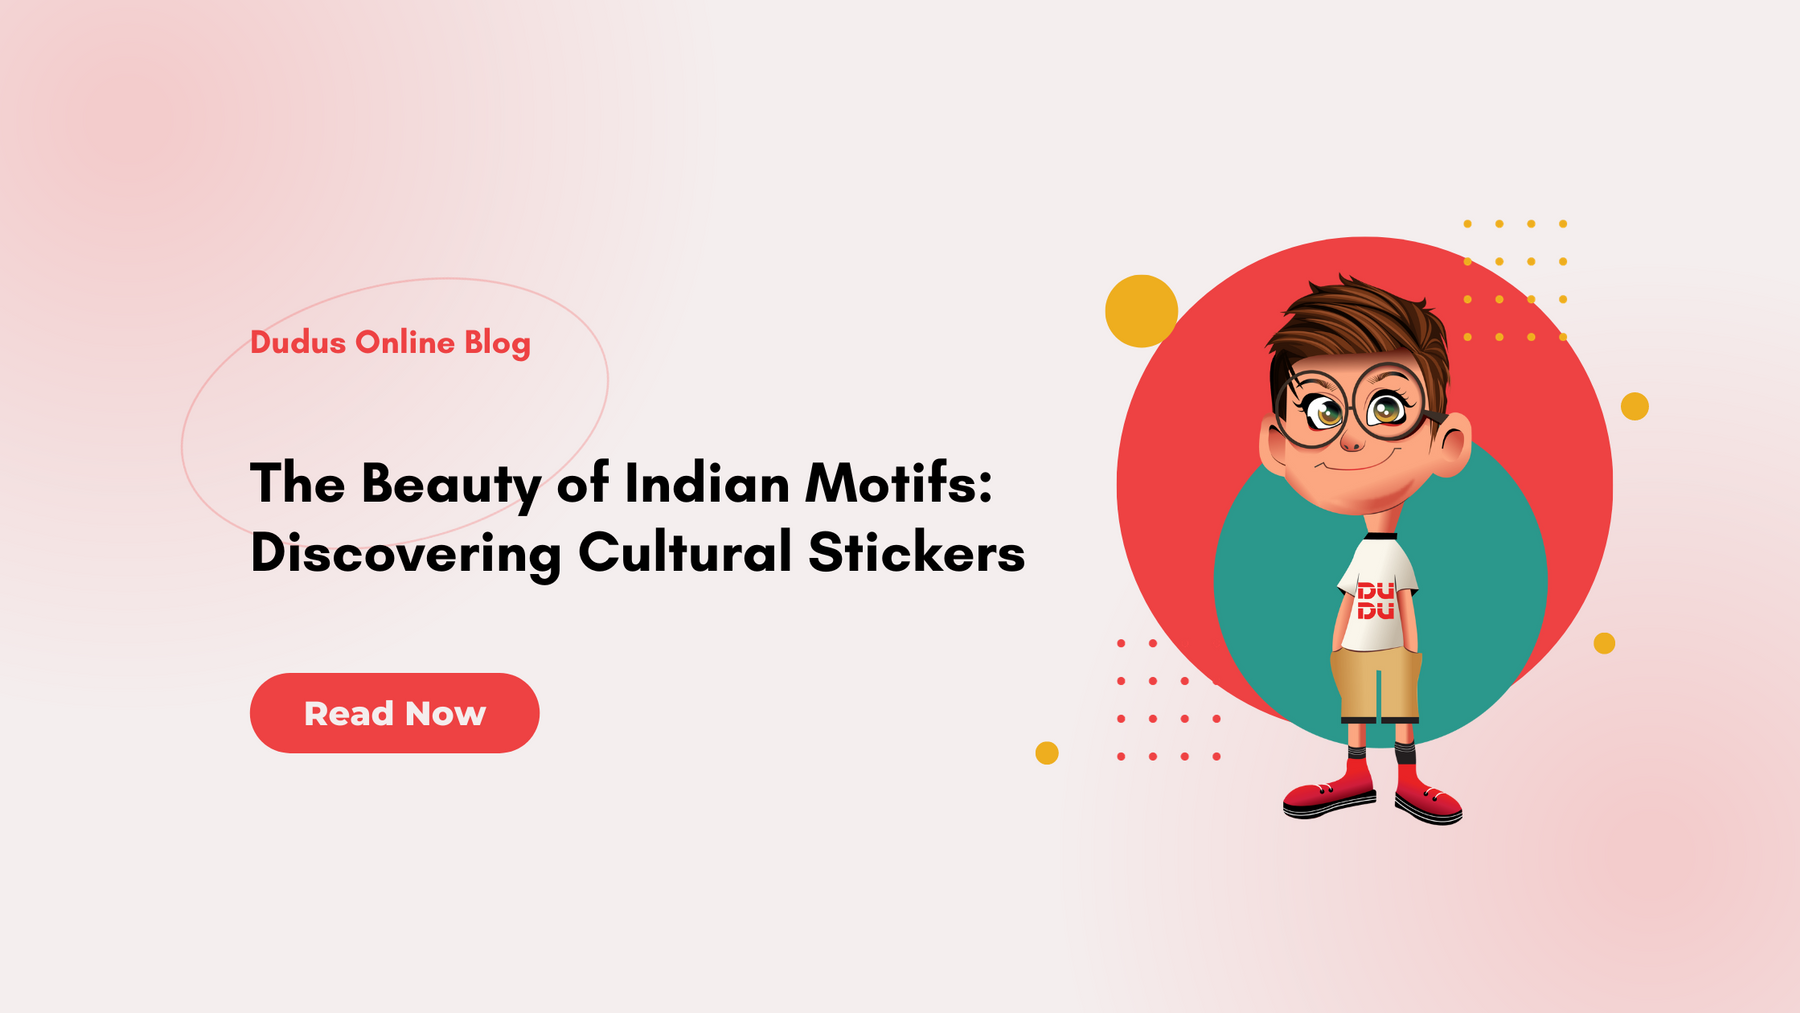 The Beauty of Indian Motifs: Discovering Cultural Stickers